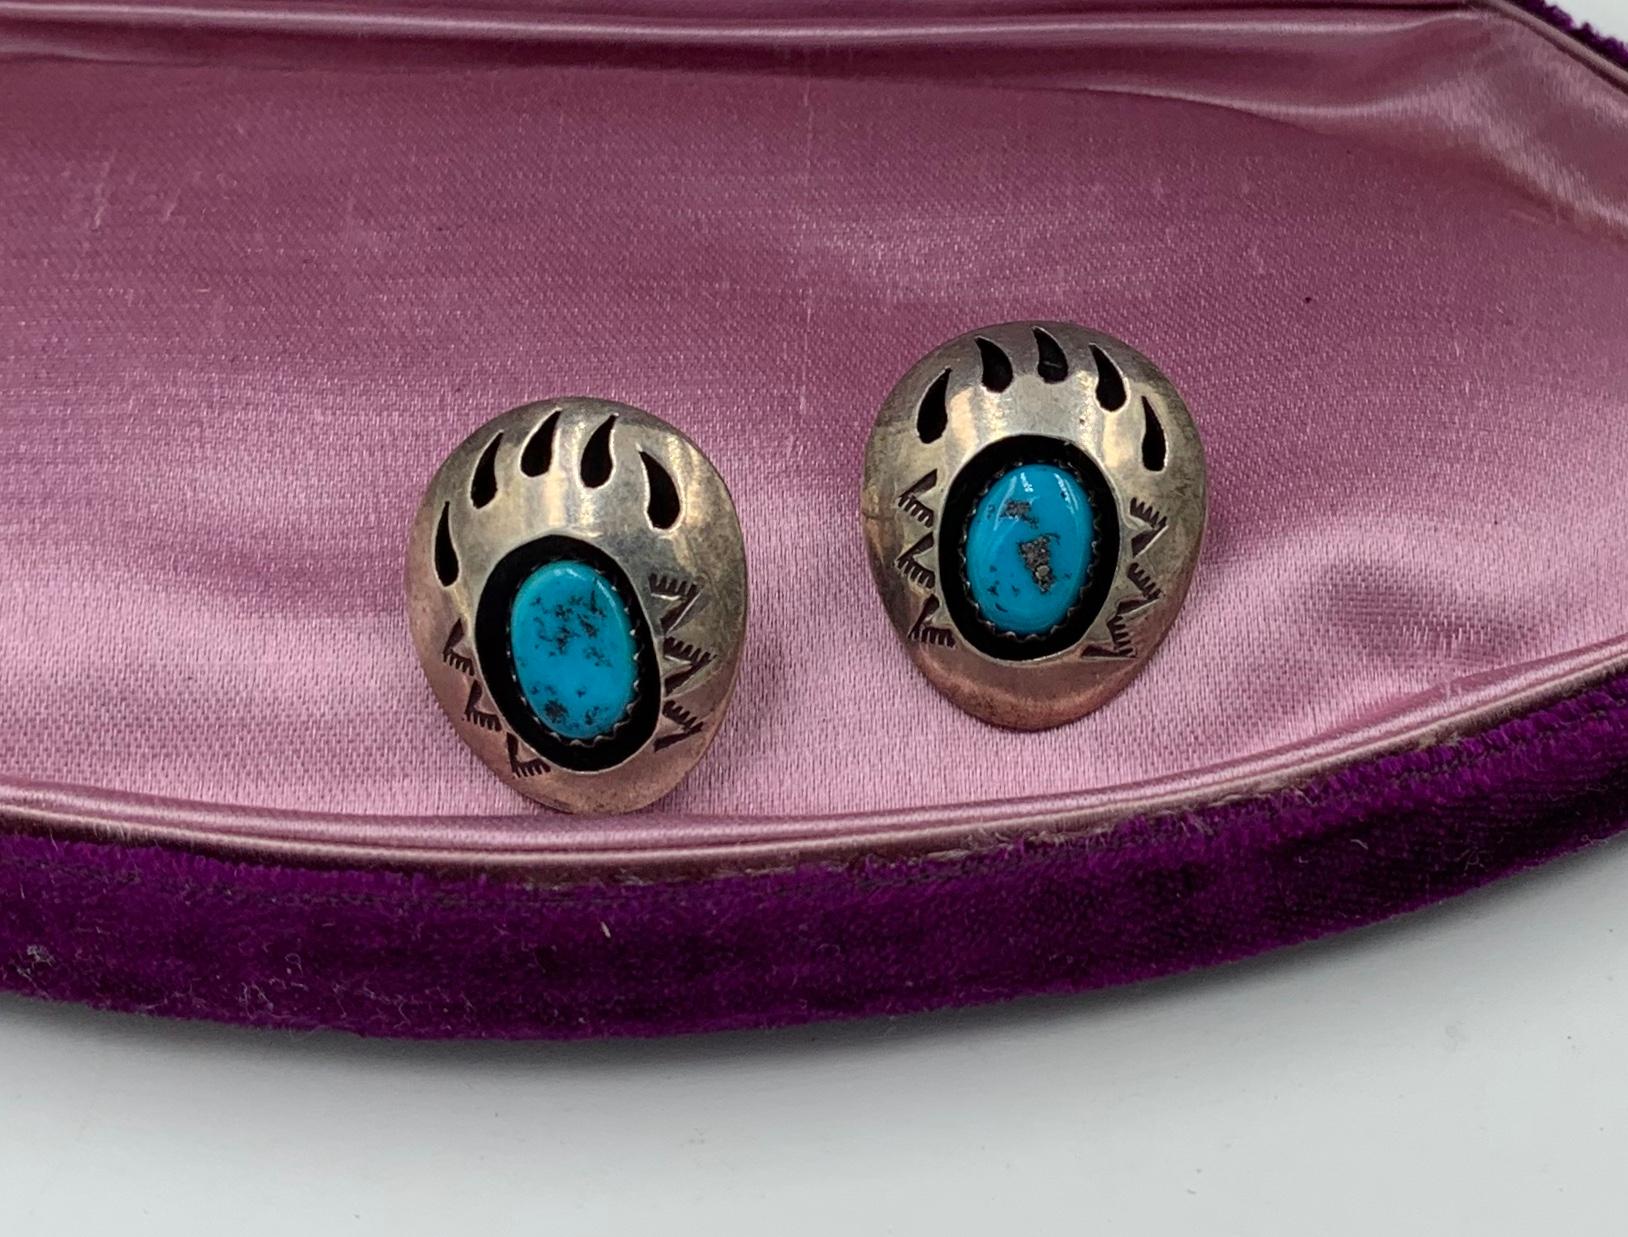 A stunning pair of antique Native American Navajo Turquoise Shadowbox Bear Paw Earrings signed by Navajo artist Teddy Goodluck.  The earrings with the bear paw motif with the lovely turquoise set in the domed Shadowbox design.  The earrings are